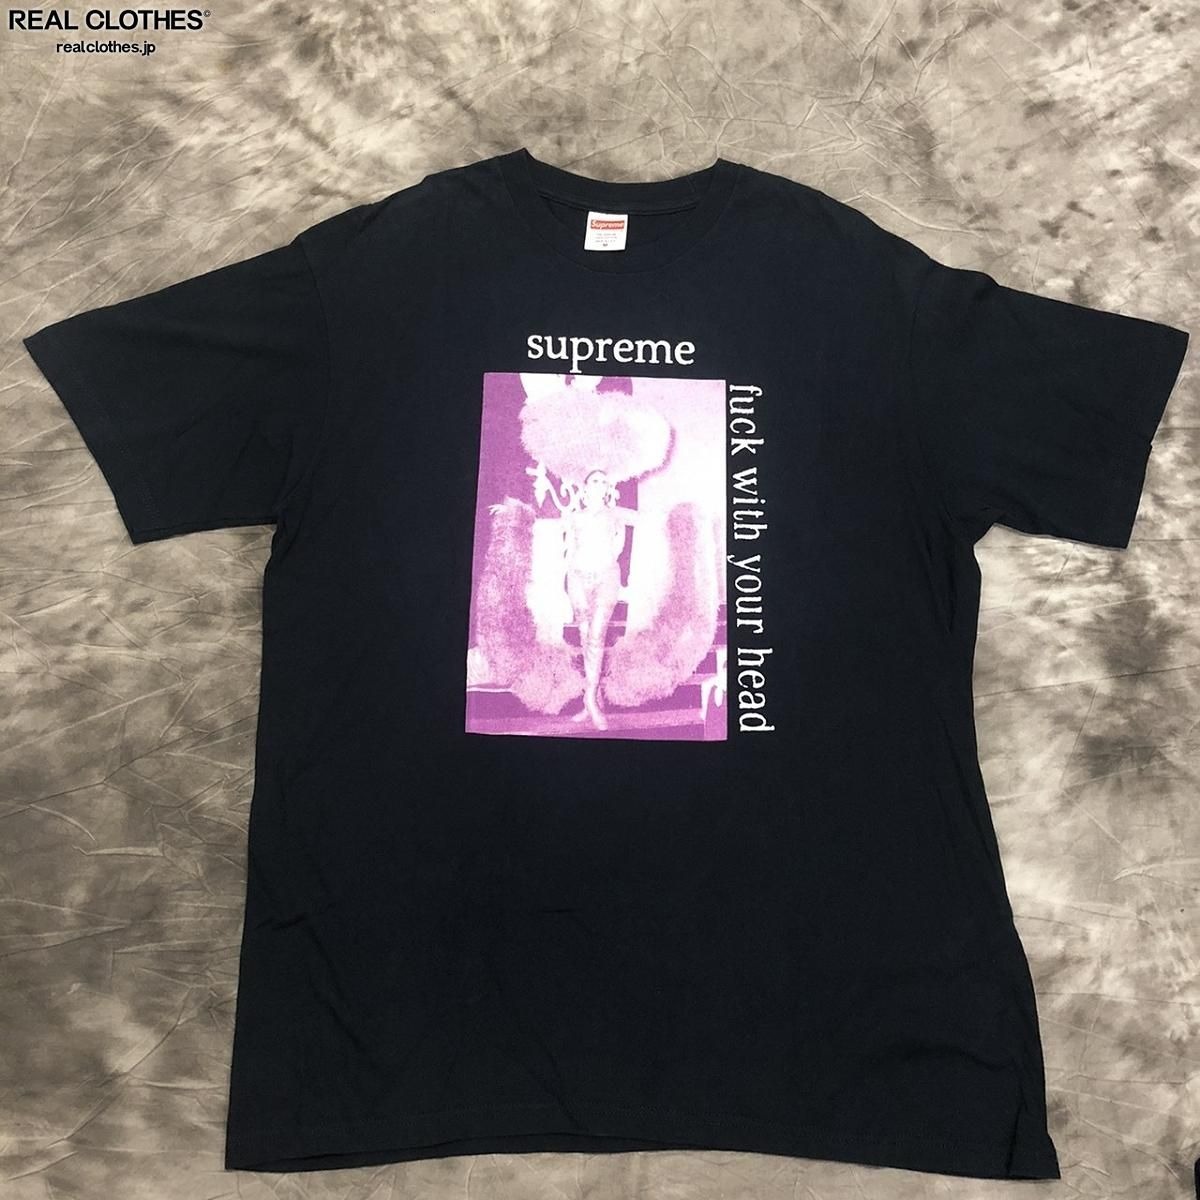 Supreme/シュプリーム【17AW】Fuck With Your Head Tee/ファックウィズユアヘッド 半袖 Tシャツ/カットソー